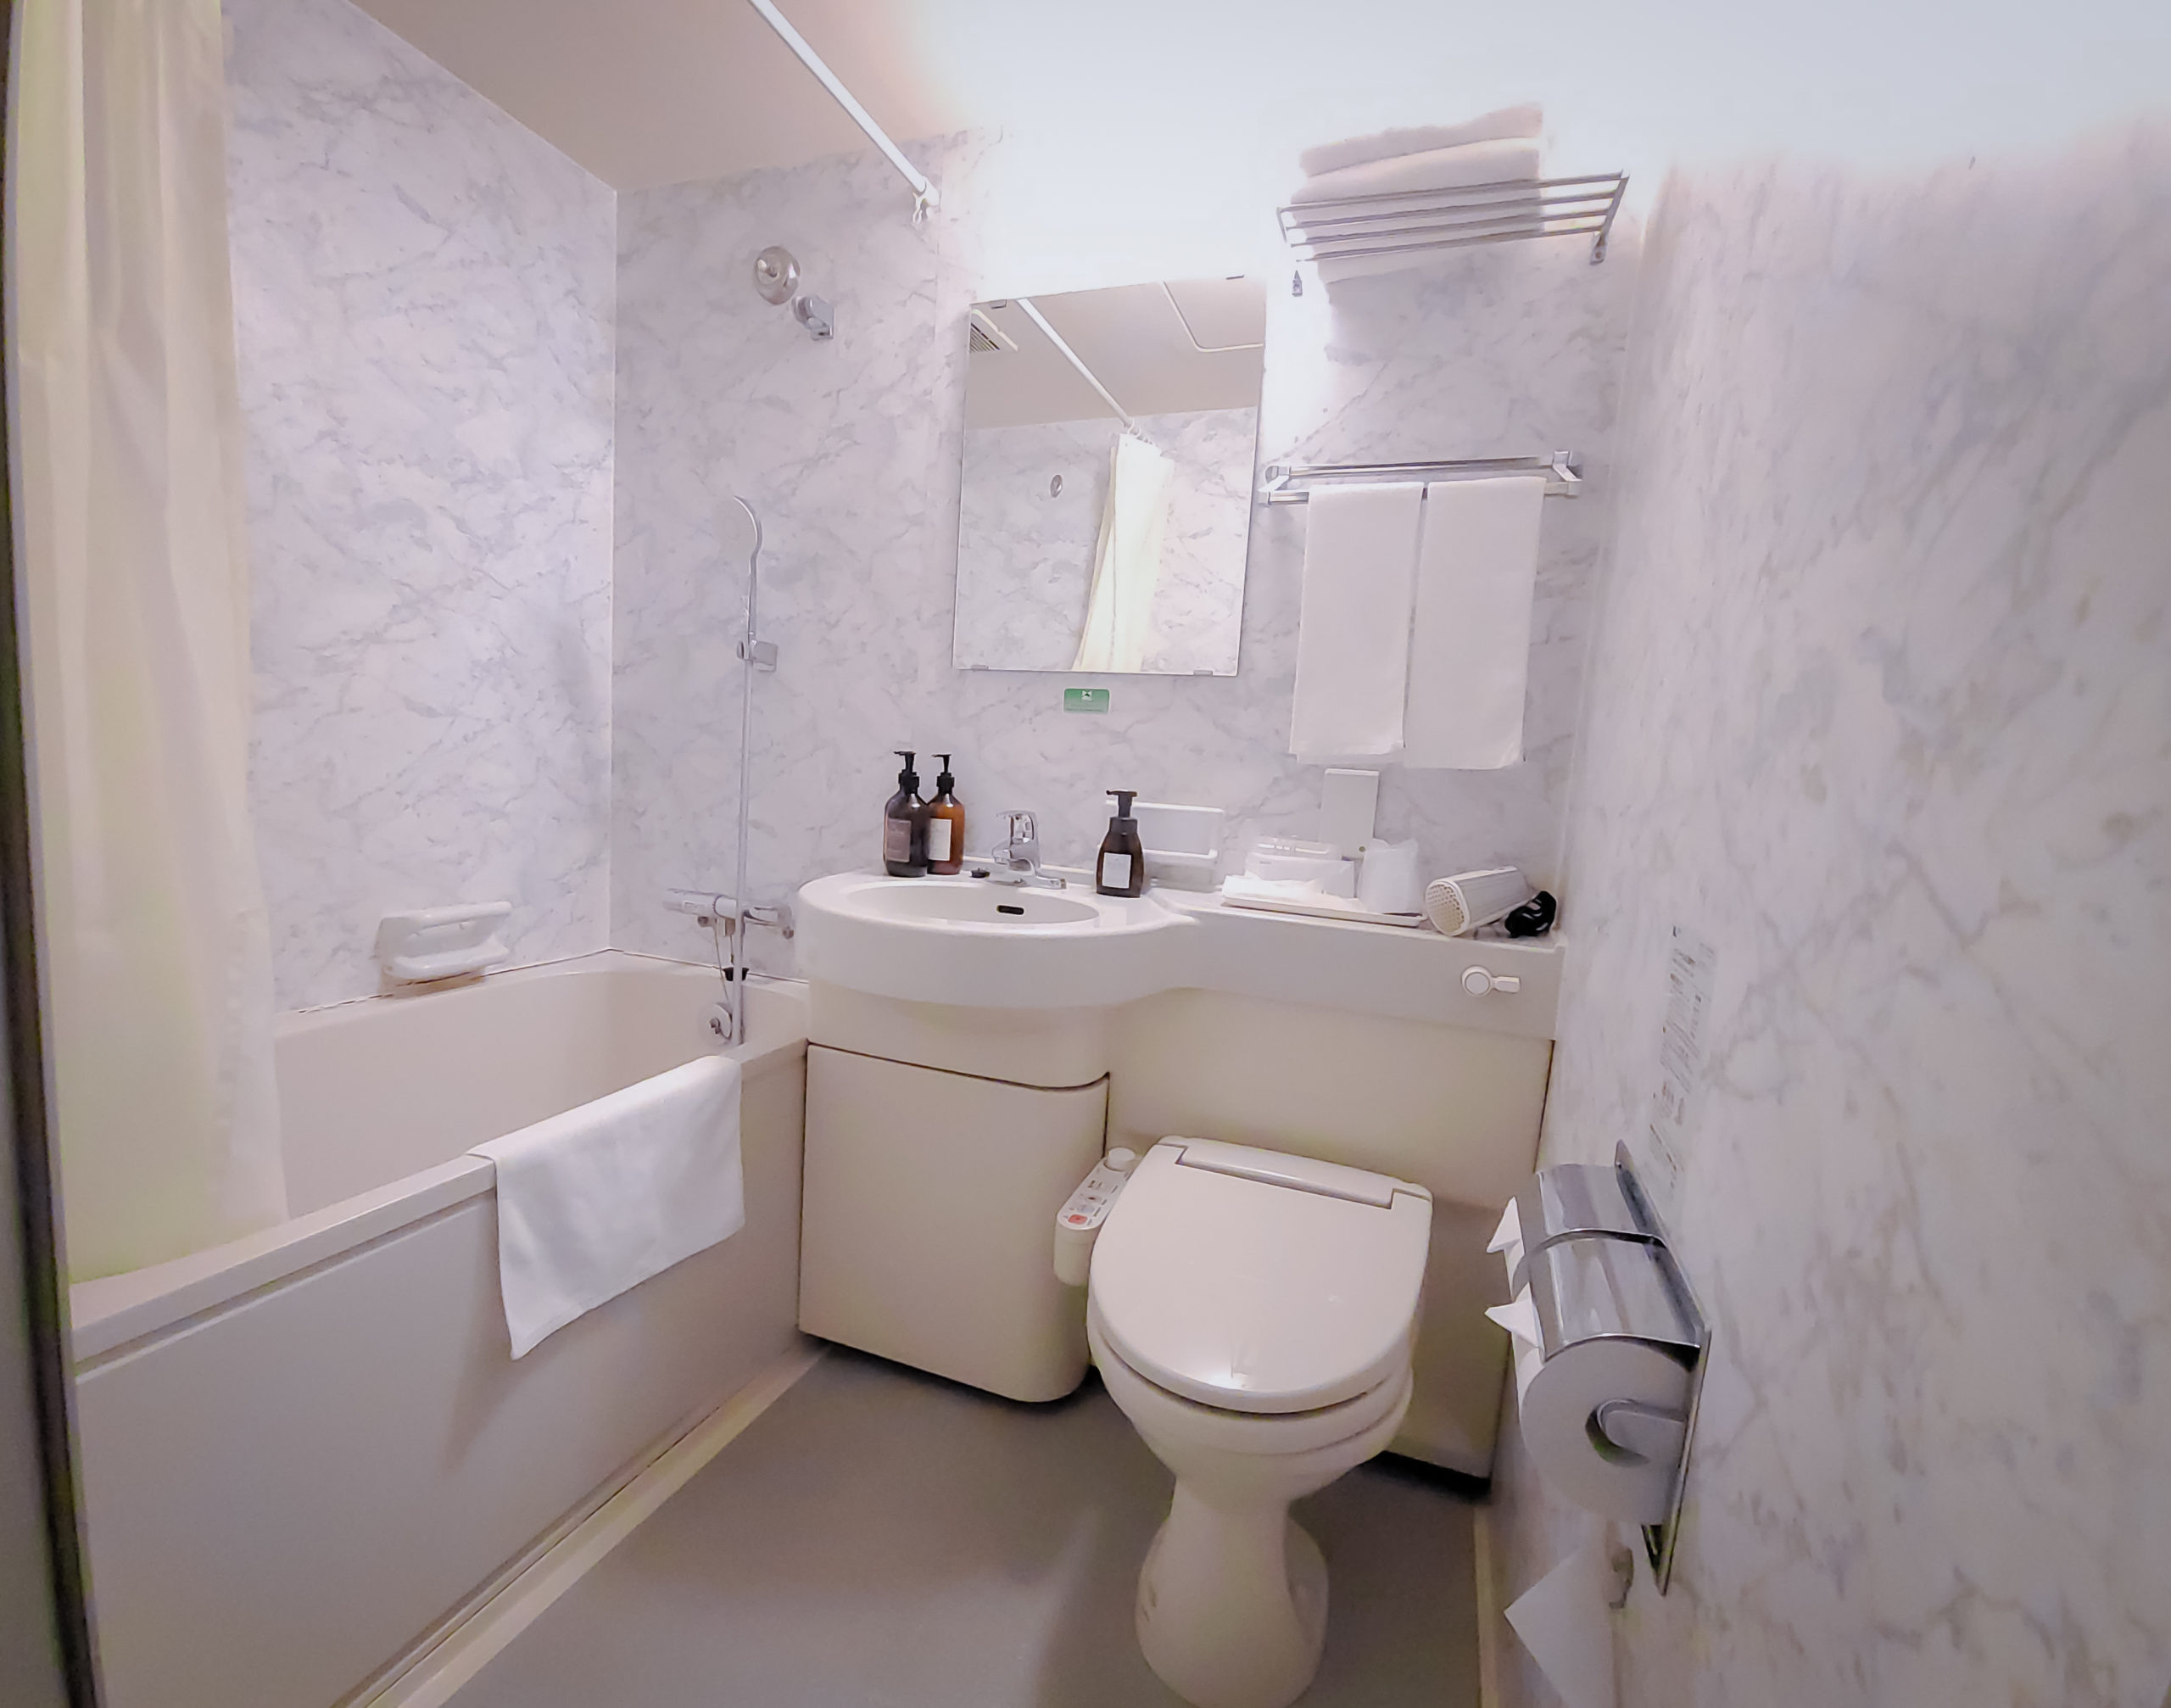 One of the twin rooms and its unit-style bathroom featuring a washlet-type toilet